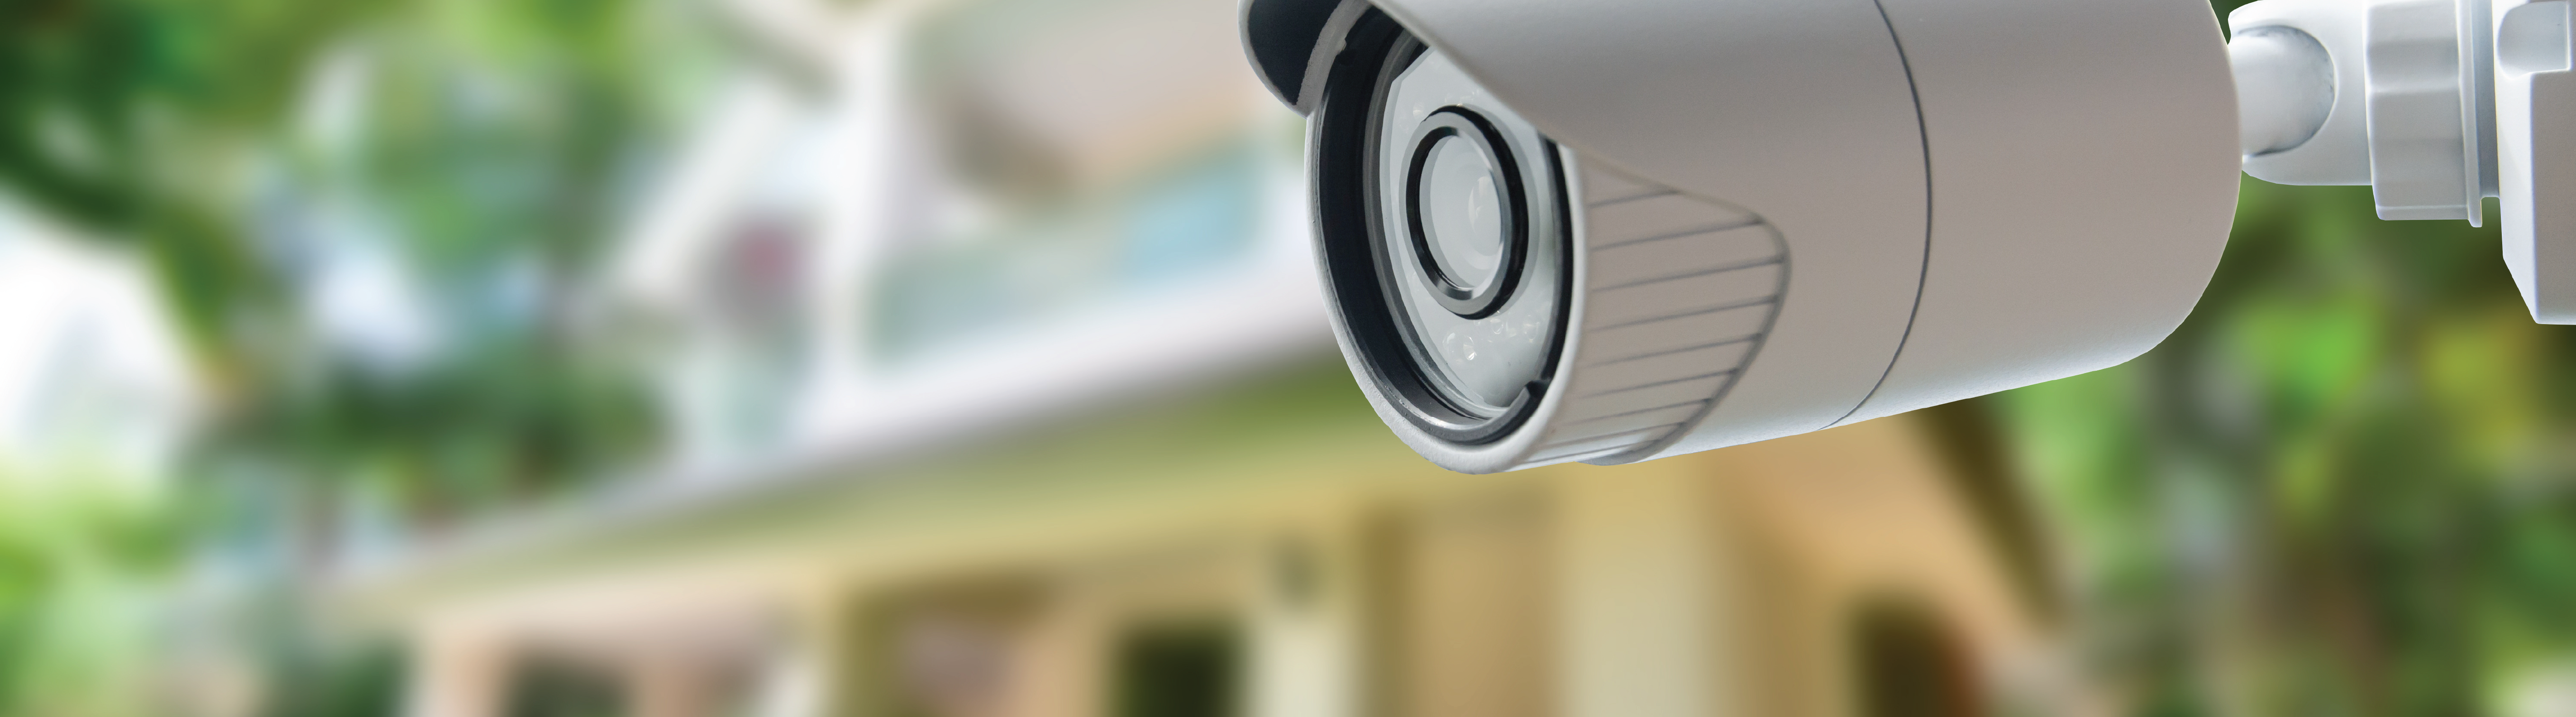 Emerald Isle Vacation Rentals featuring Safety Outdoor Security Cameras